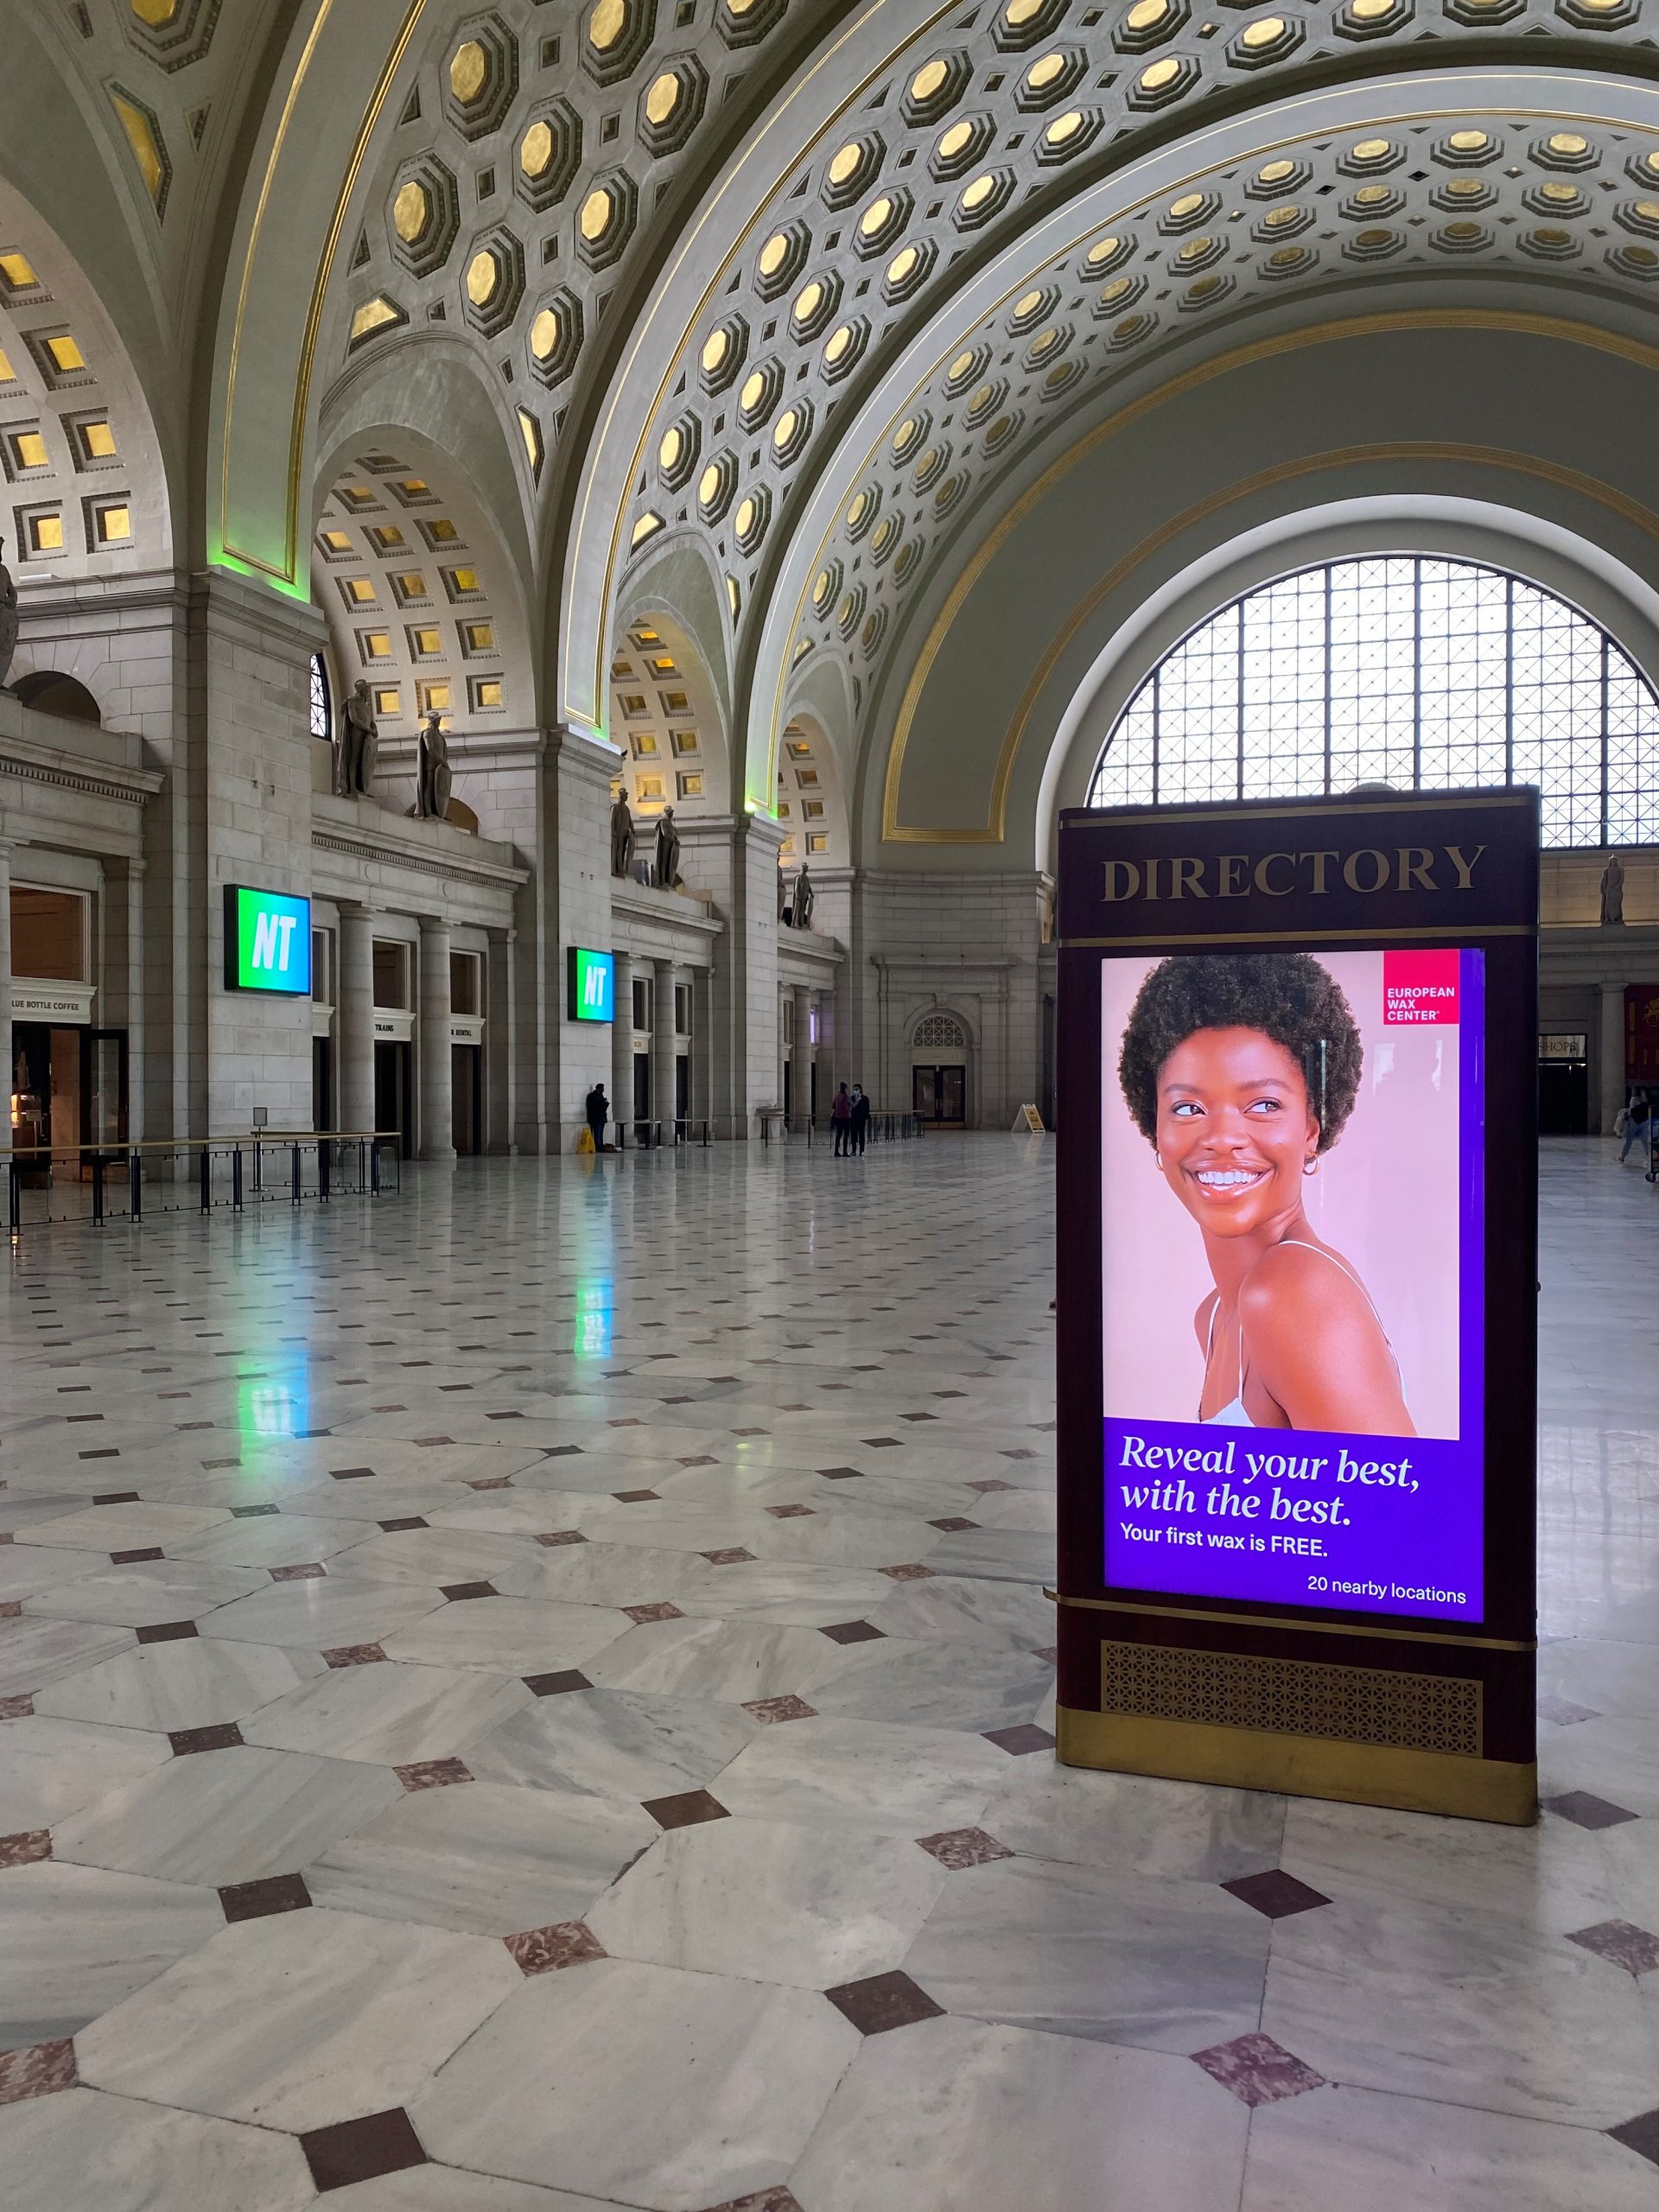 SmartLink Vantage Remote Device Monitoring and Control by Outdoorlink at Union Station DC with Samsung Digital Kiosks Consumer Group and